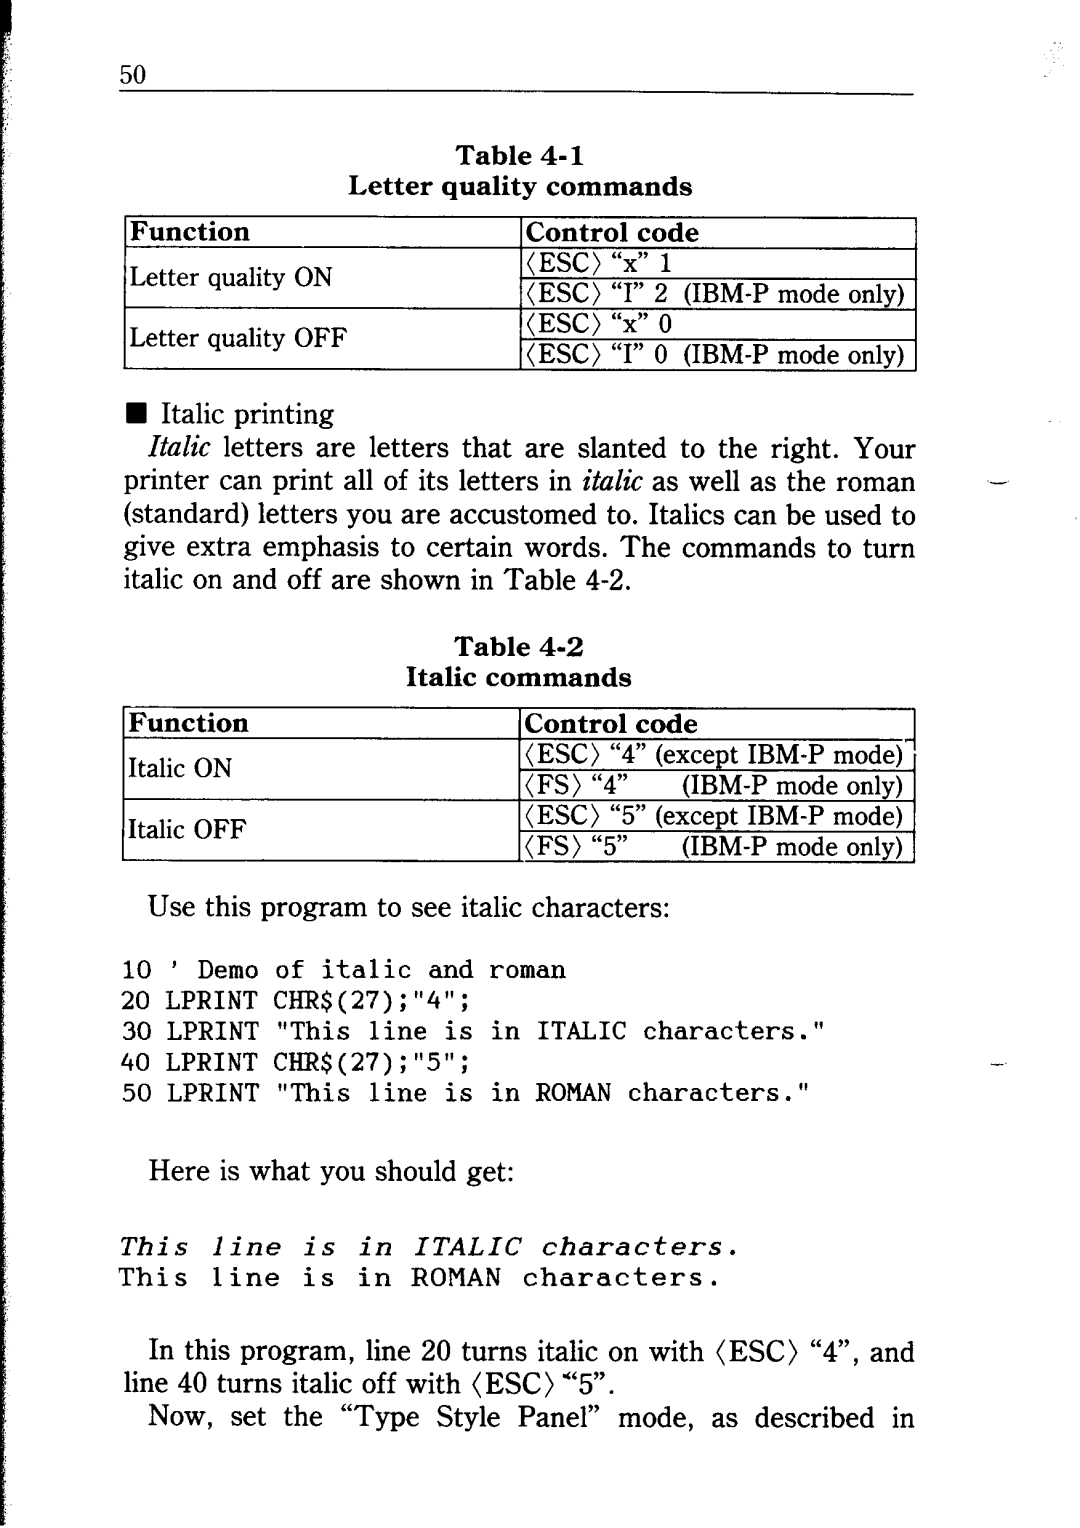 Star Micronics NB24-10/15 user manual This line is in ITALIC characters, commands 